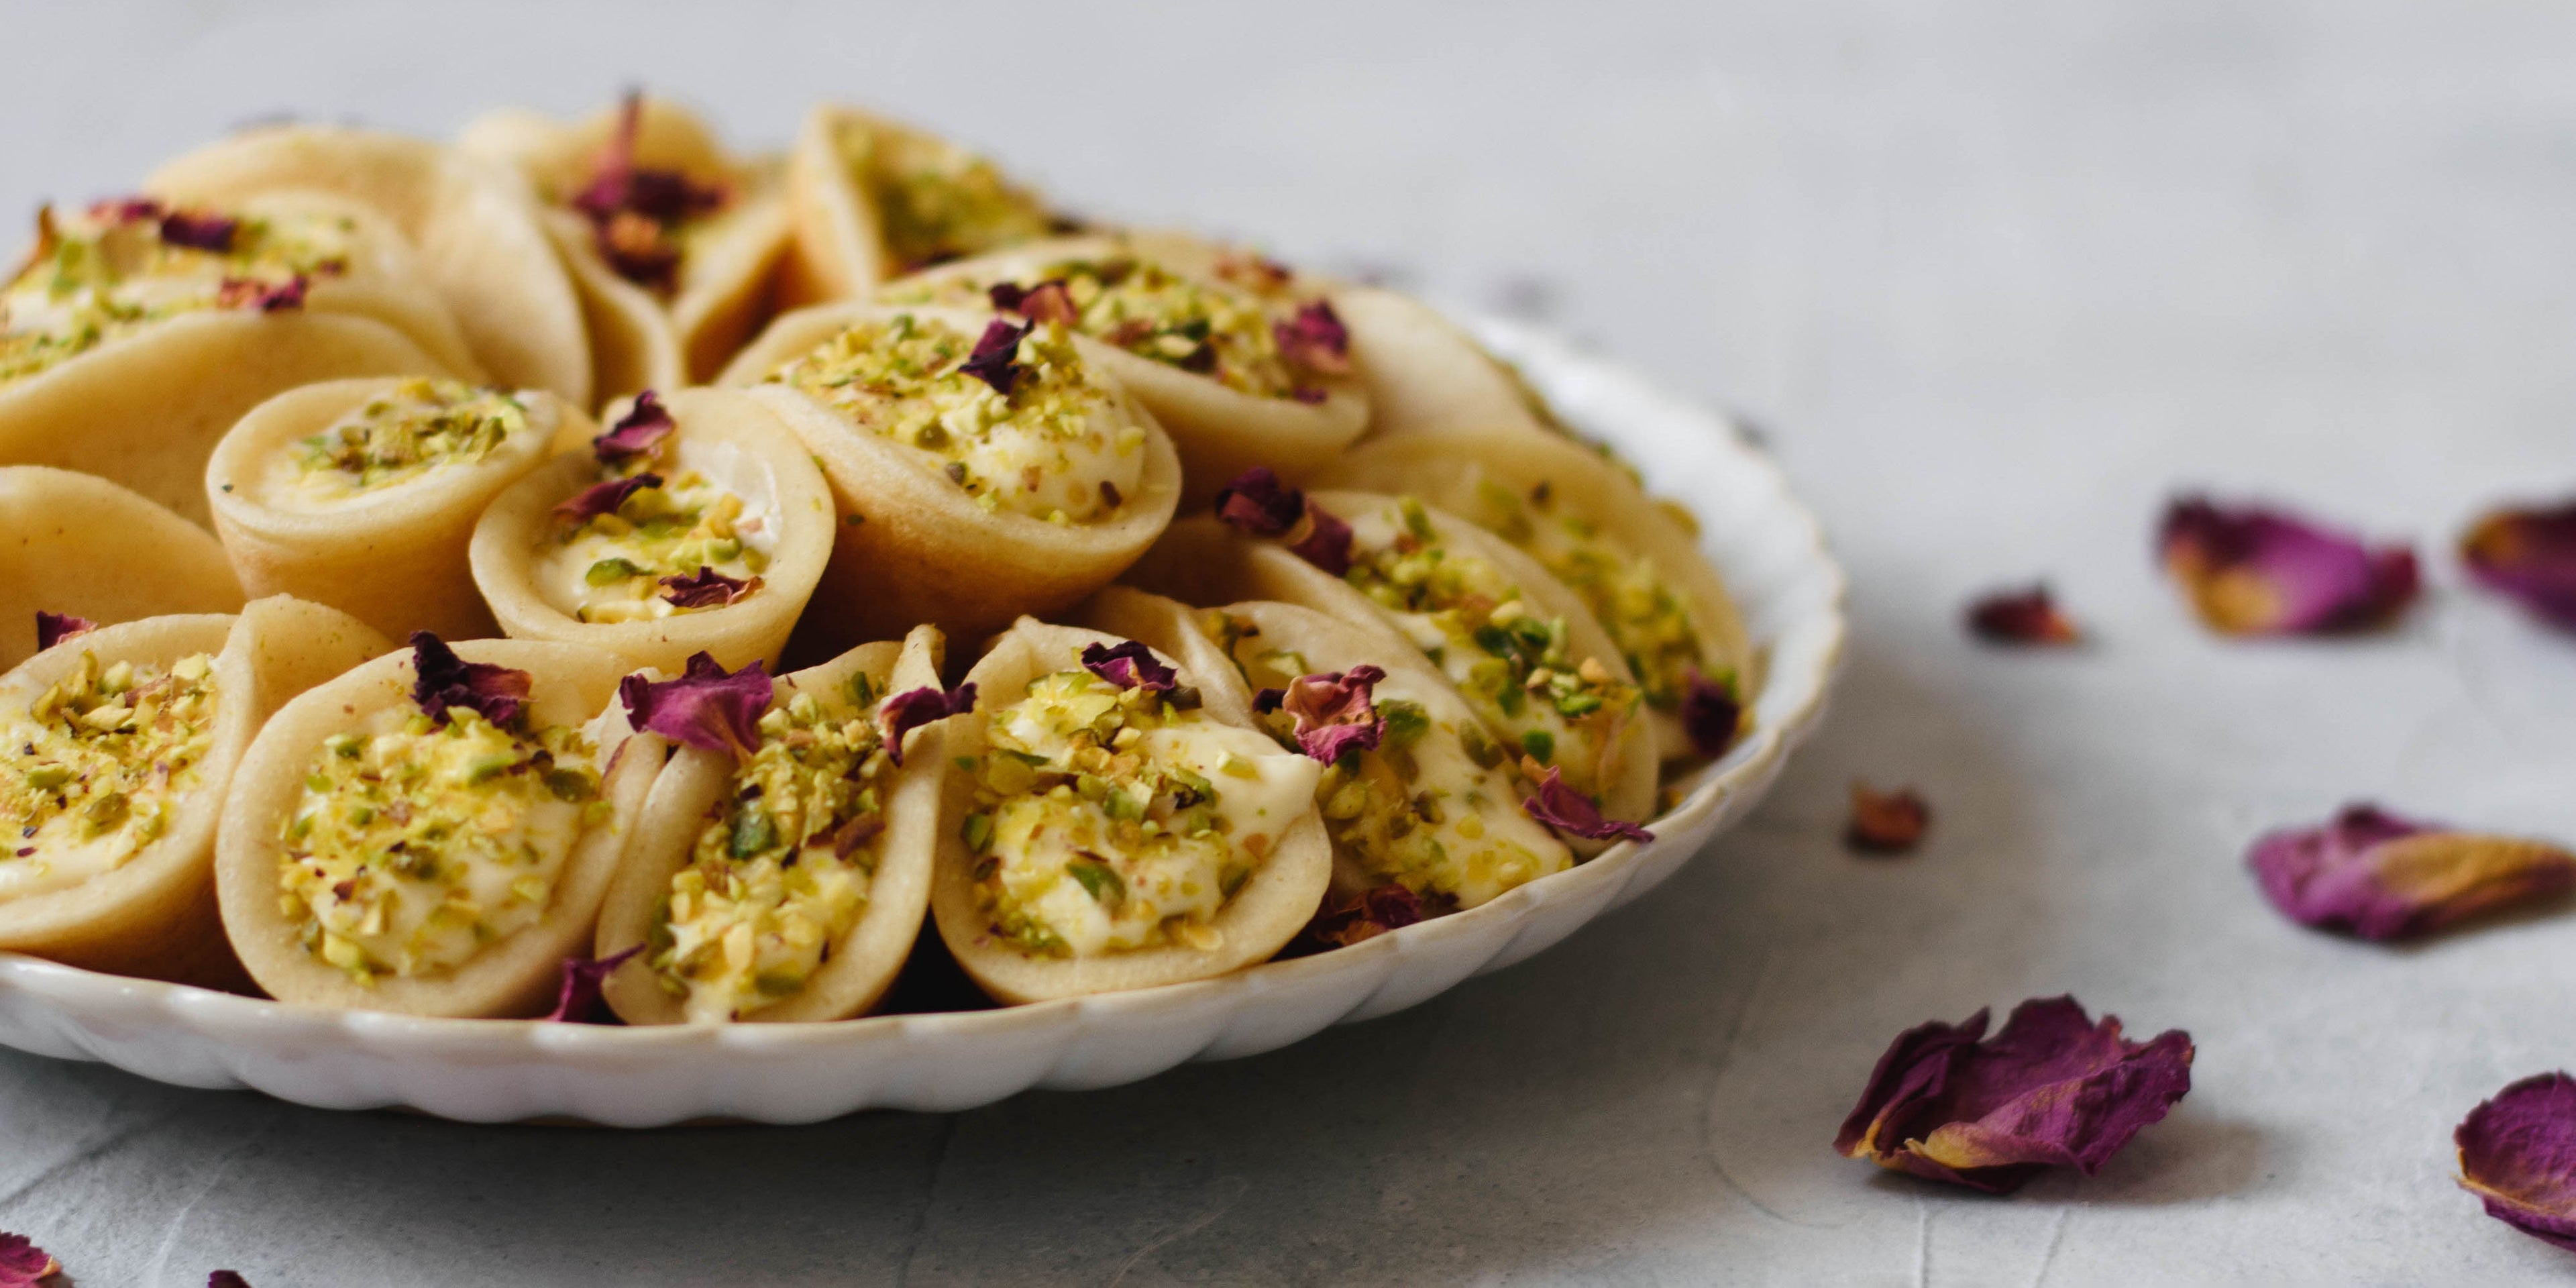 Qatayef on a plate next to petals for decoration